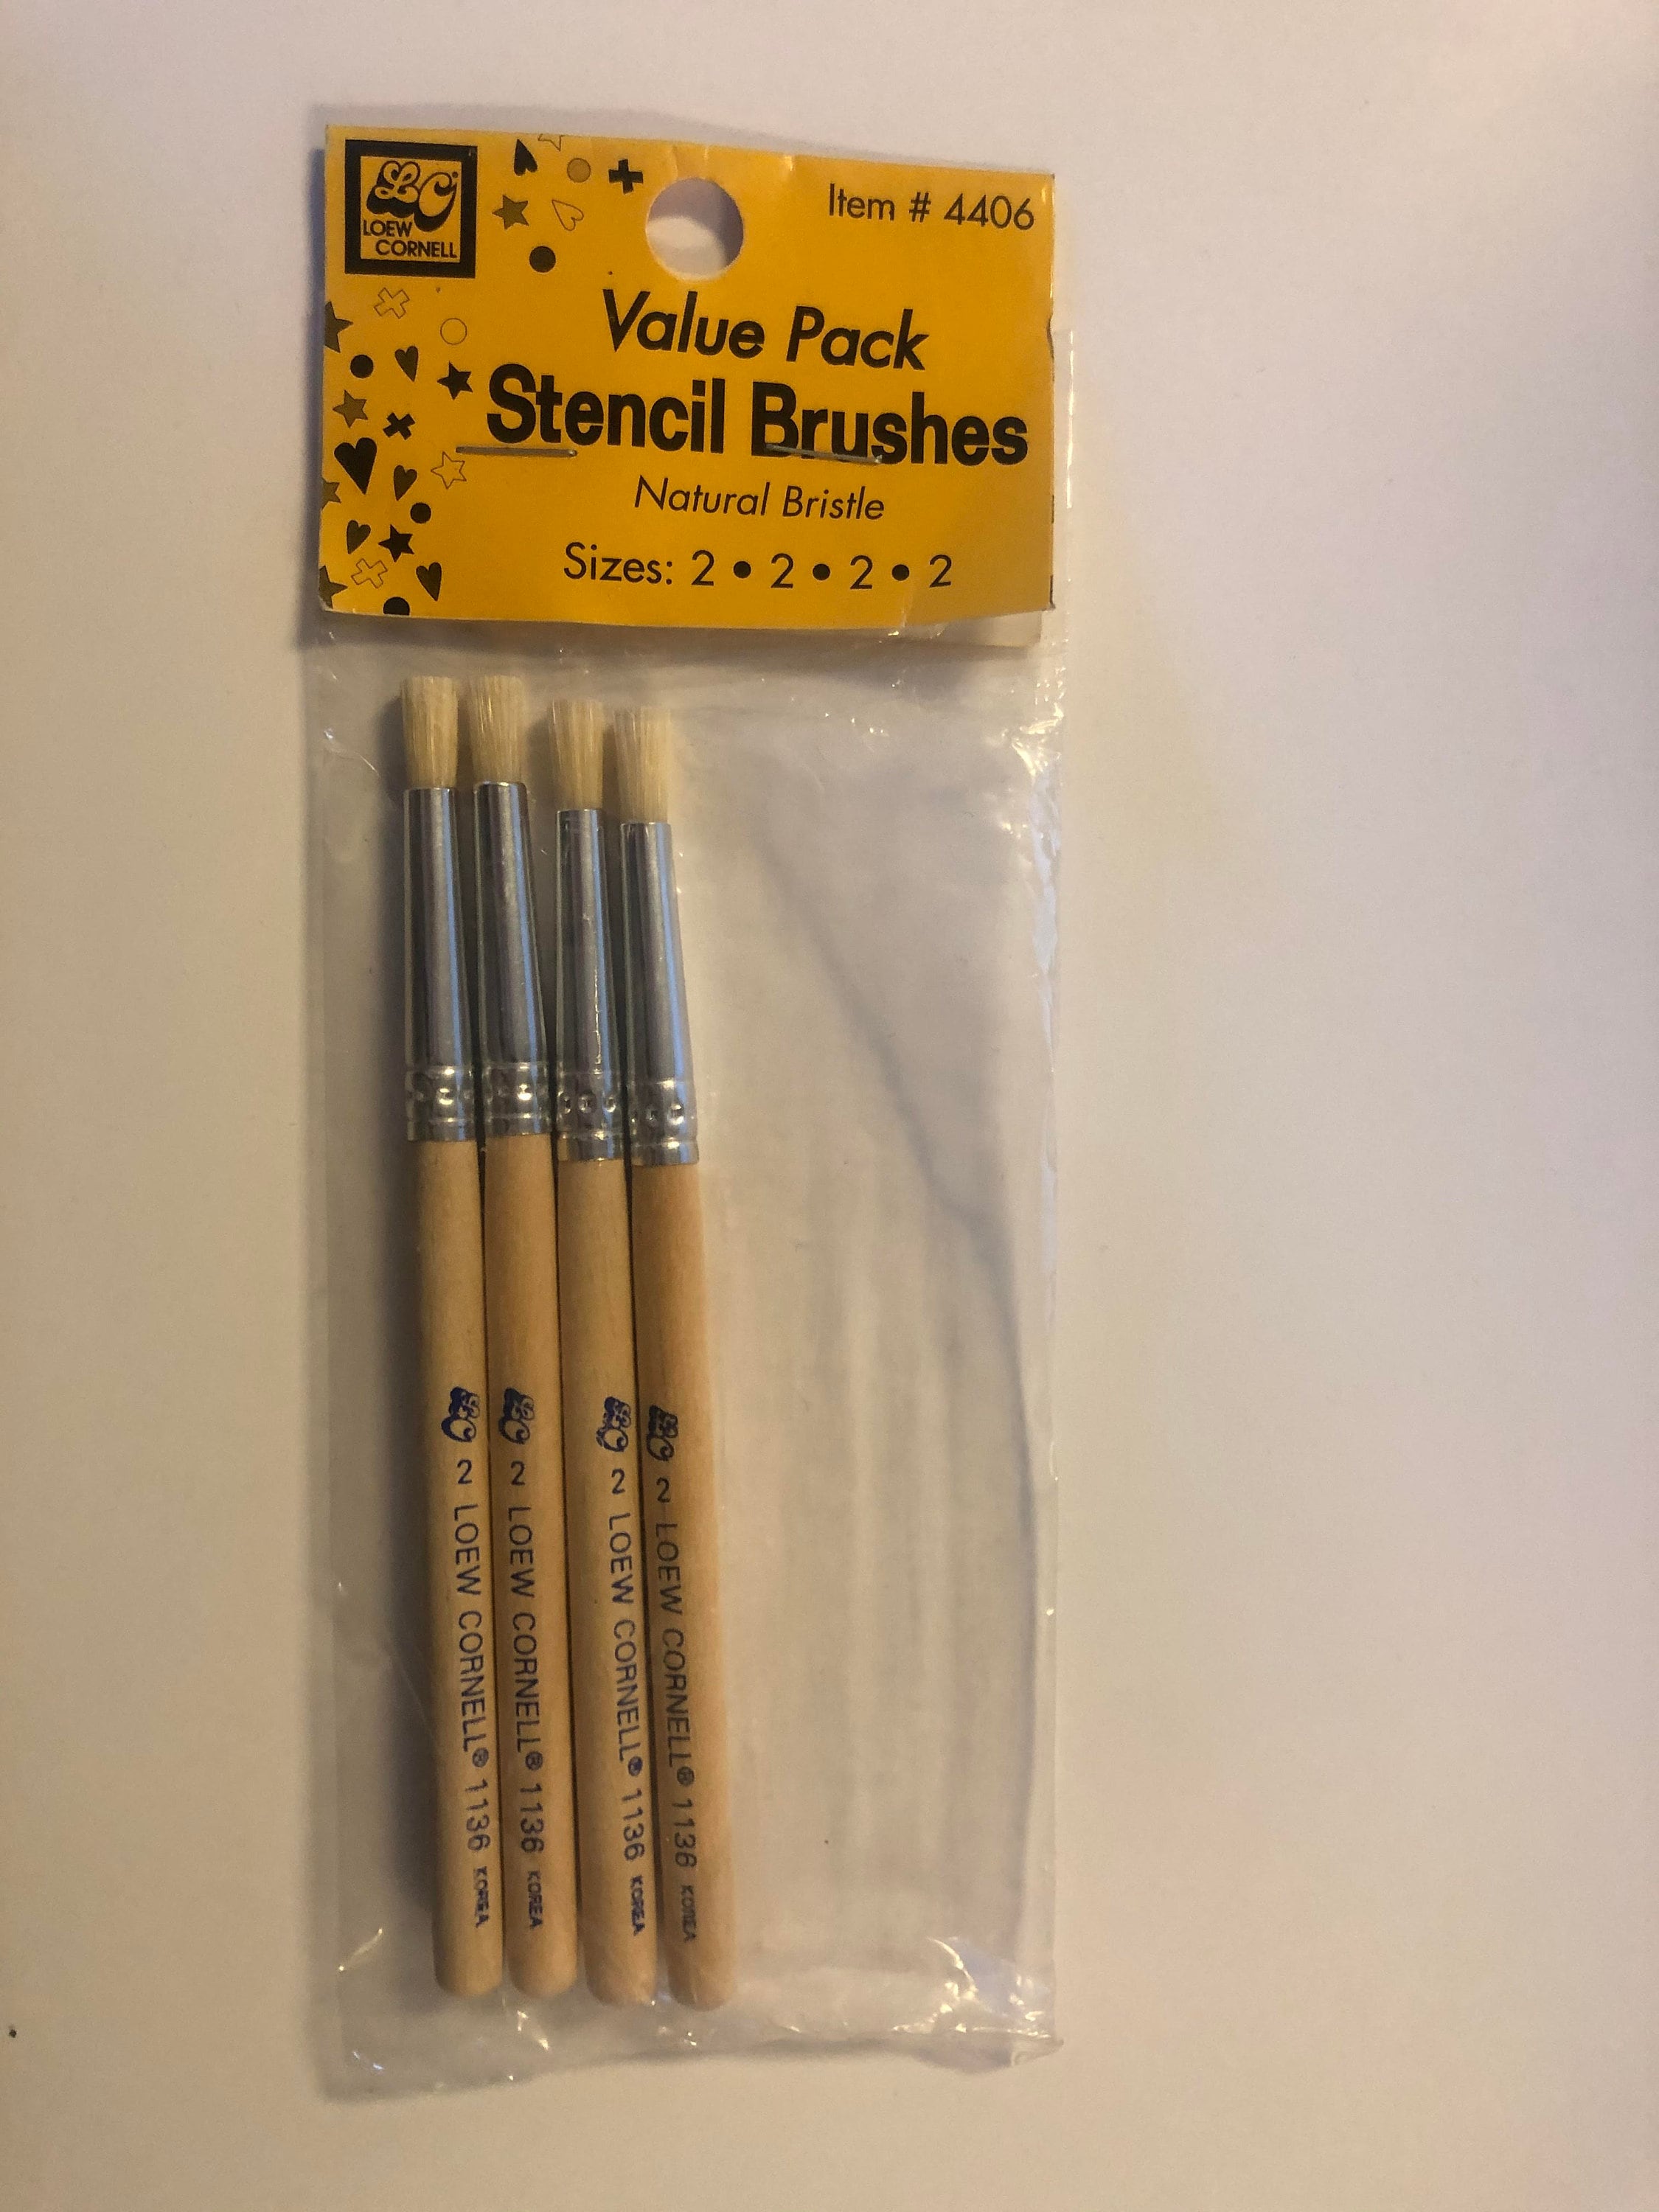 Stencil Brushes Value Pack from Loew Cornell in size 2 (4 brushes)